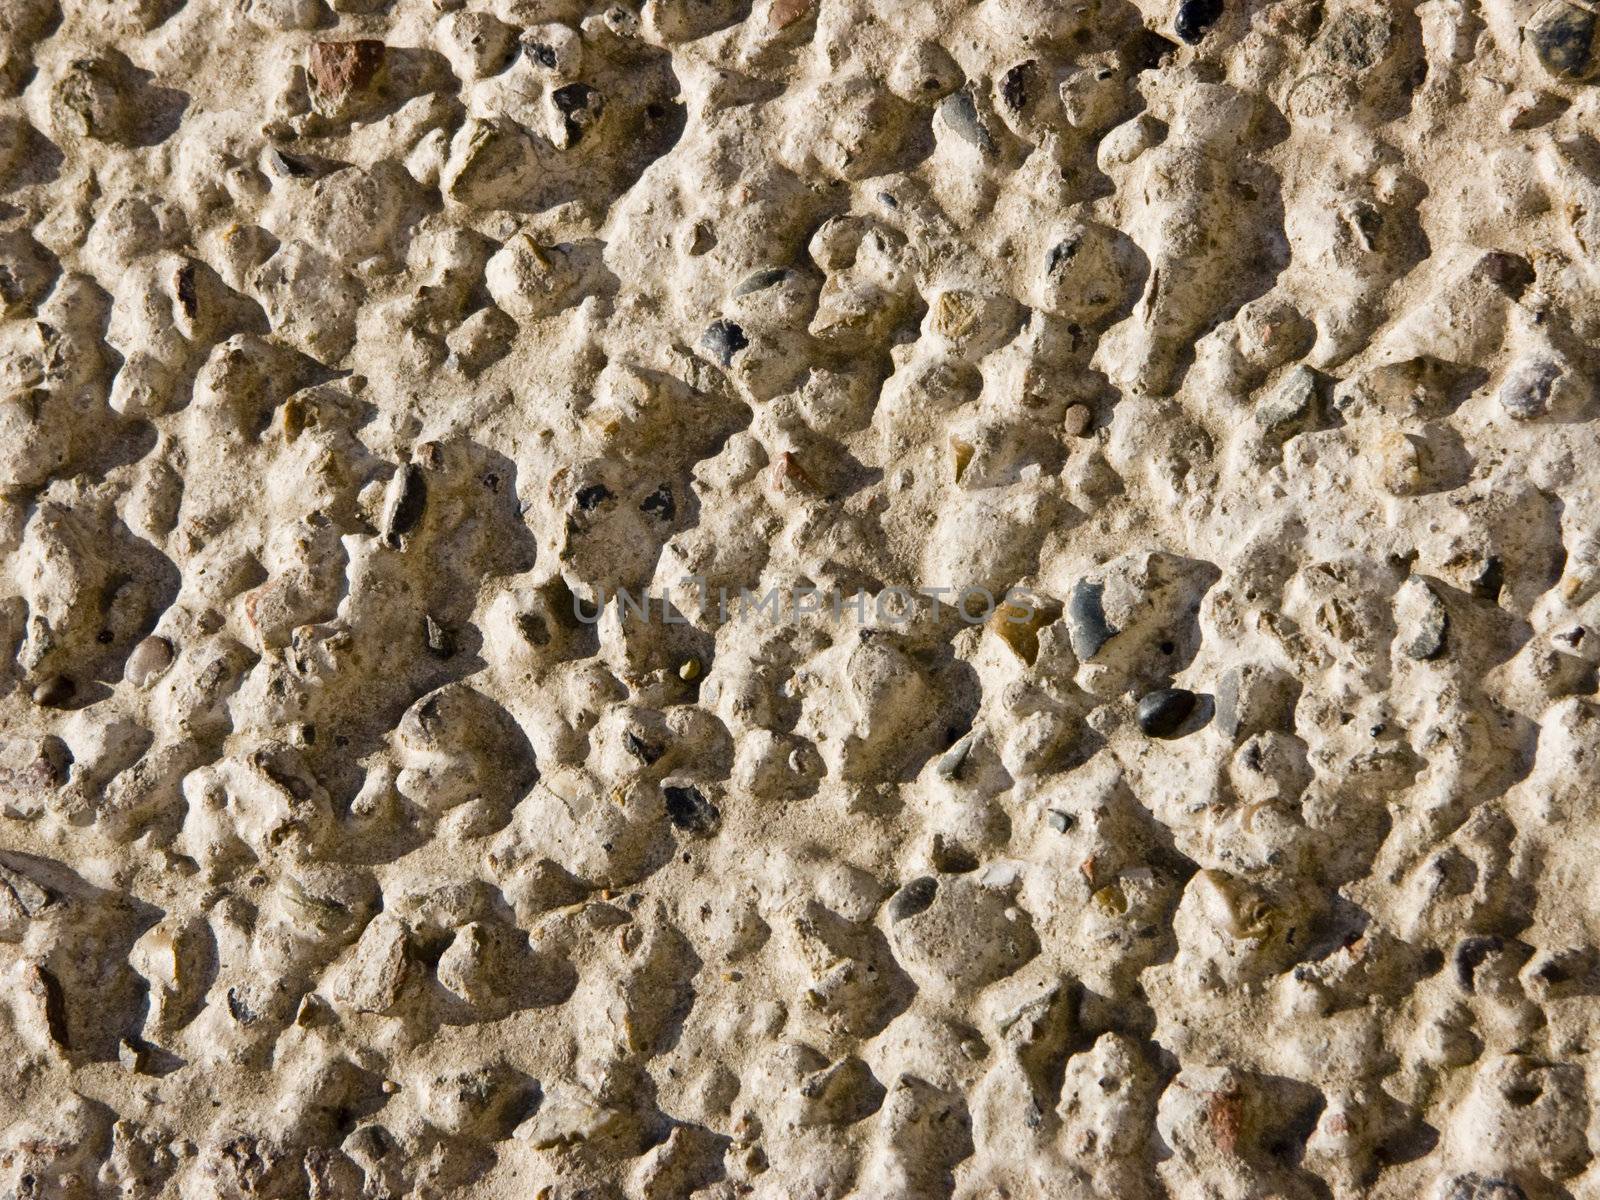 The image of the stones which are sticking out from concrete